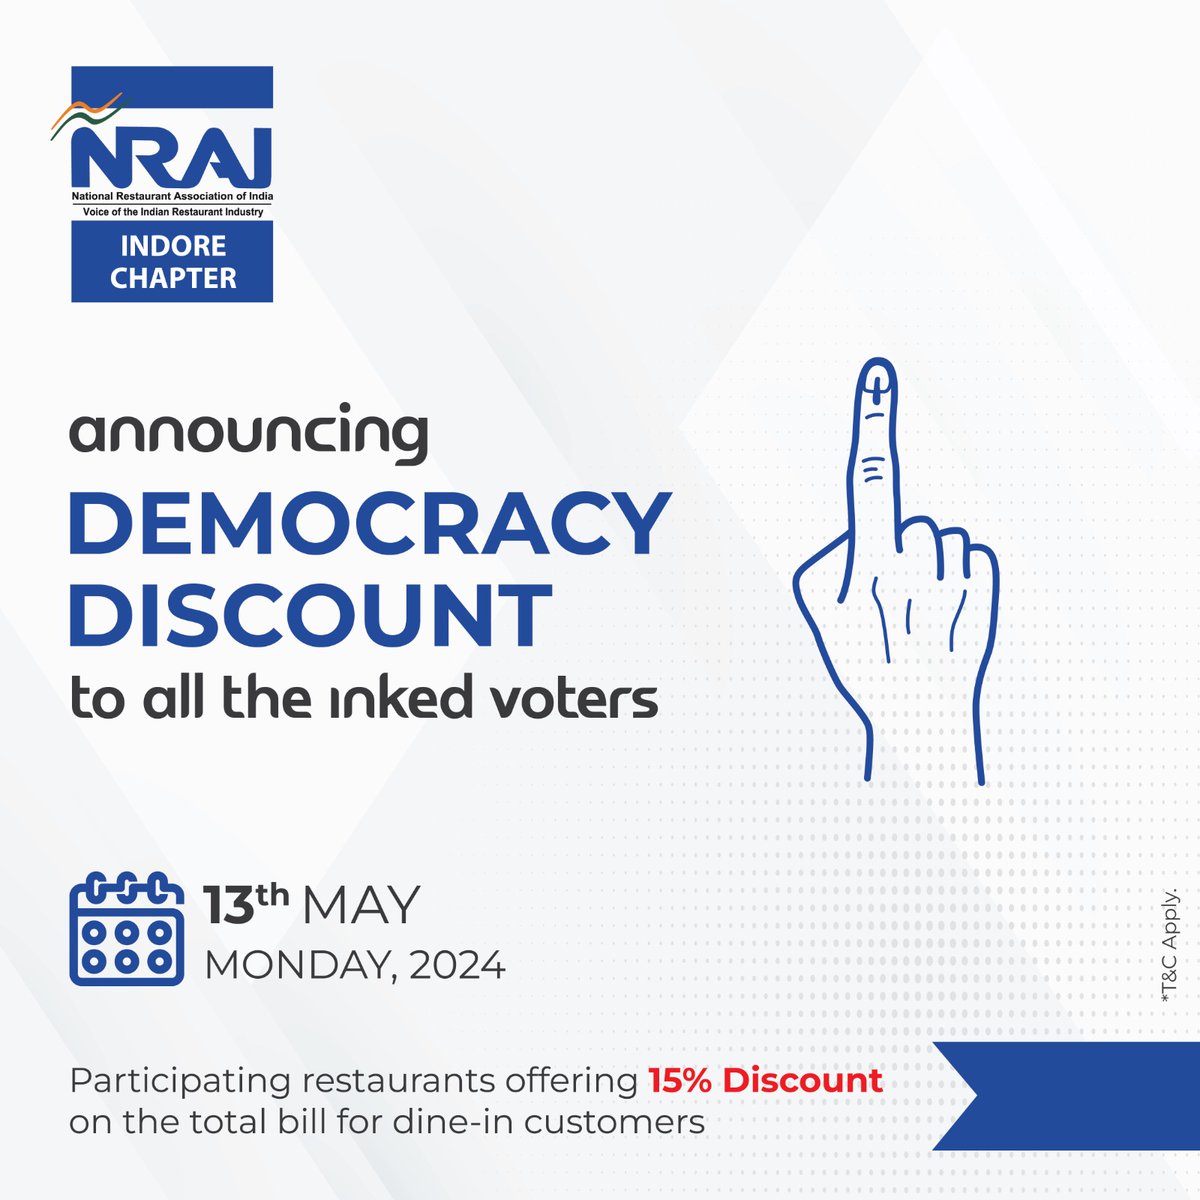 Attention inked voters!

NRAI's Indore CHAPTER brings you the Democracy Discount initiative.

Get 15% off your total bill at select restaurants on May 13, 2024. It's our way of celebrating your vote!

#DemocracyDiscount #NRAIIndore #VoteAndSave #VoterPerks #InkedDining